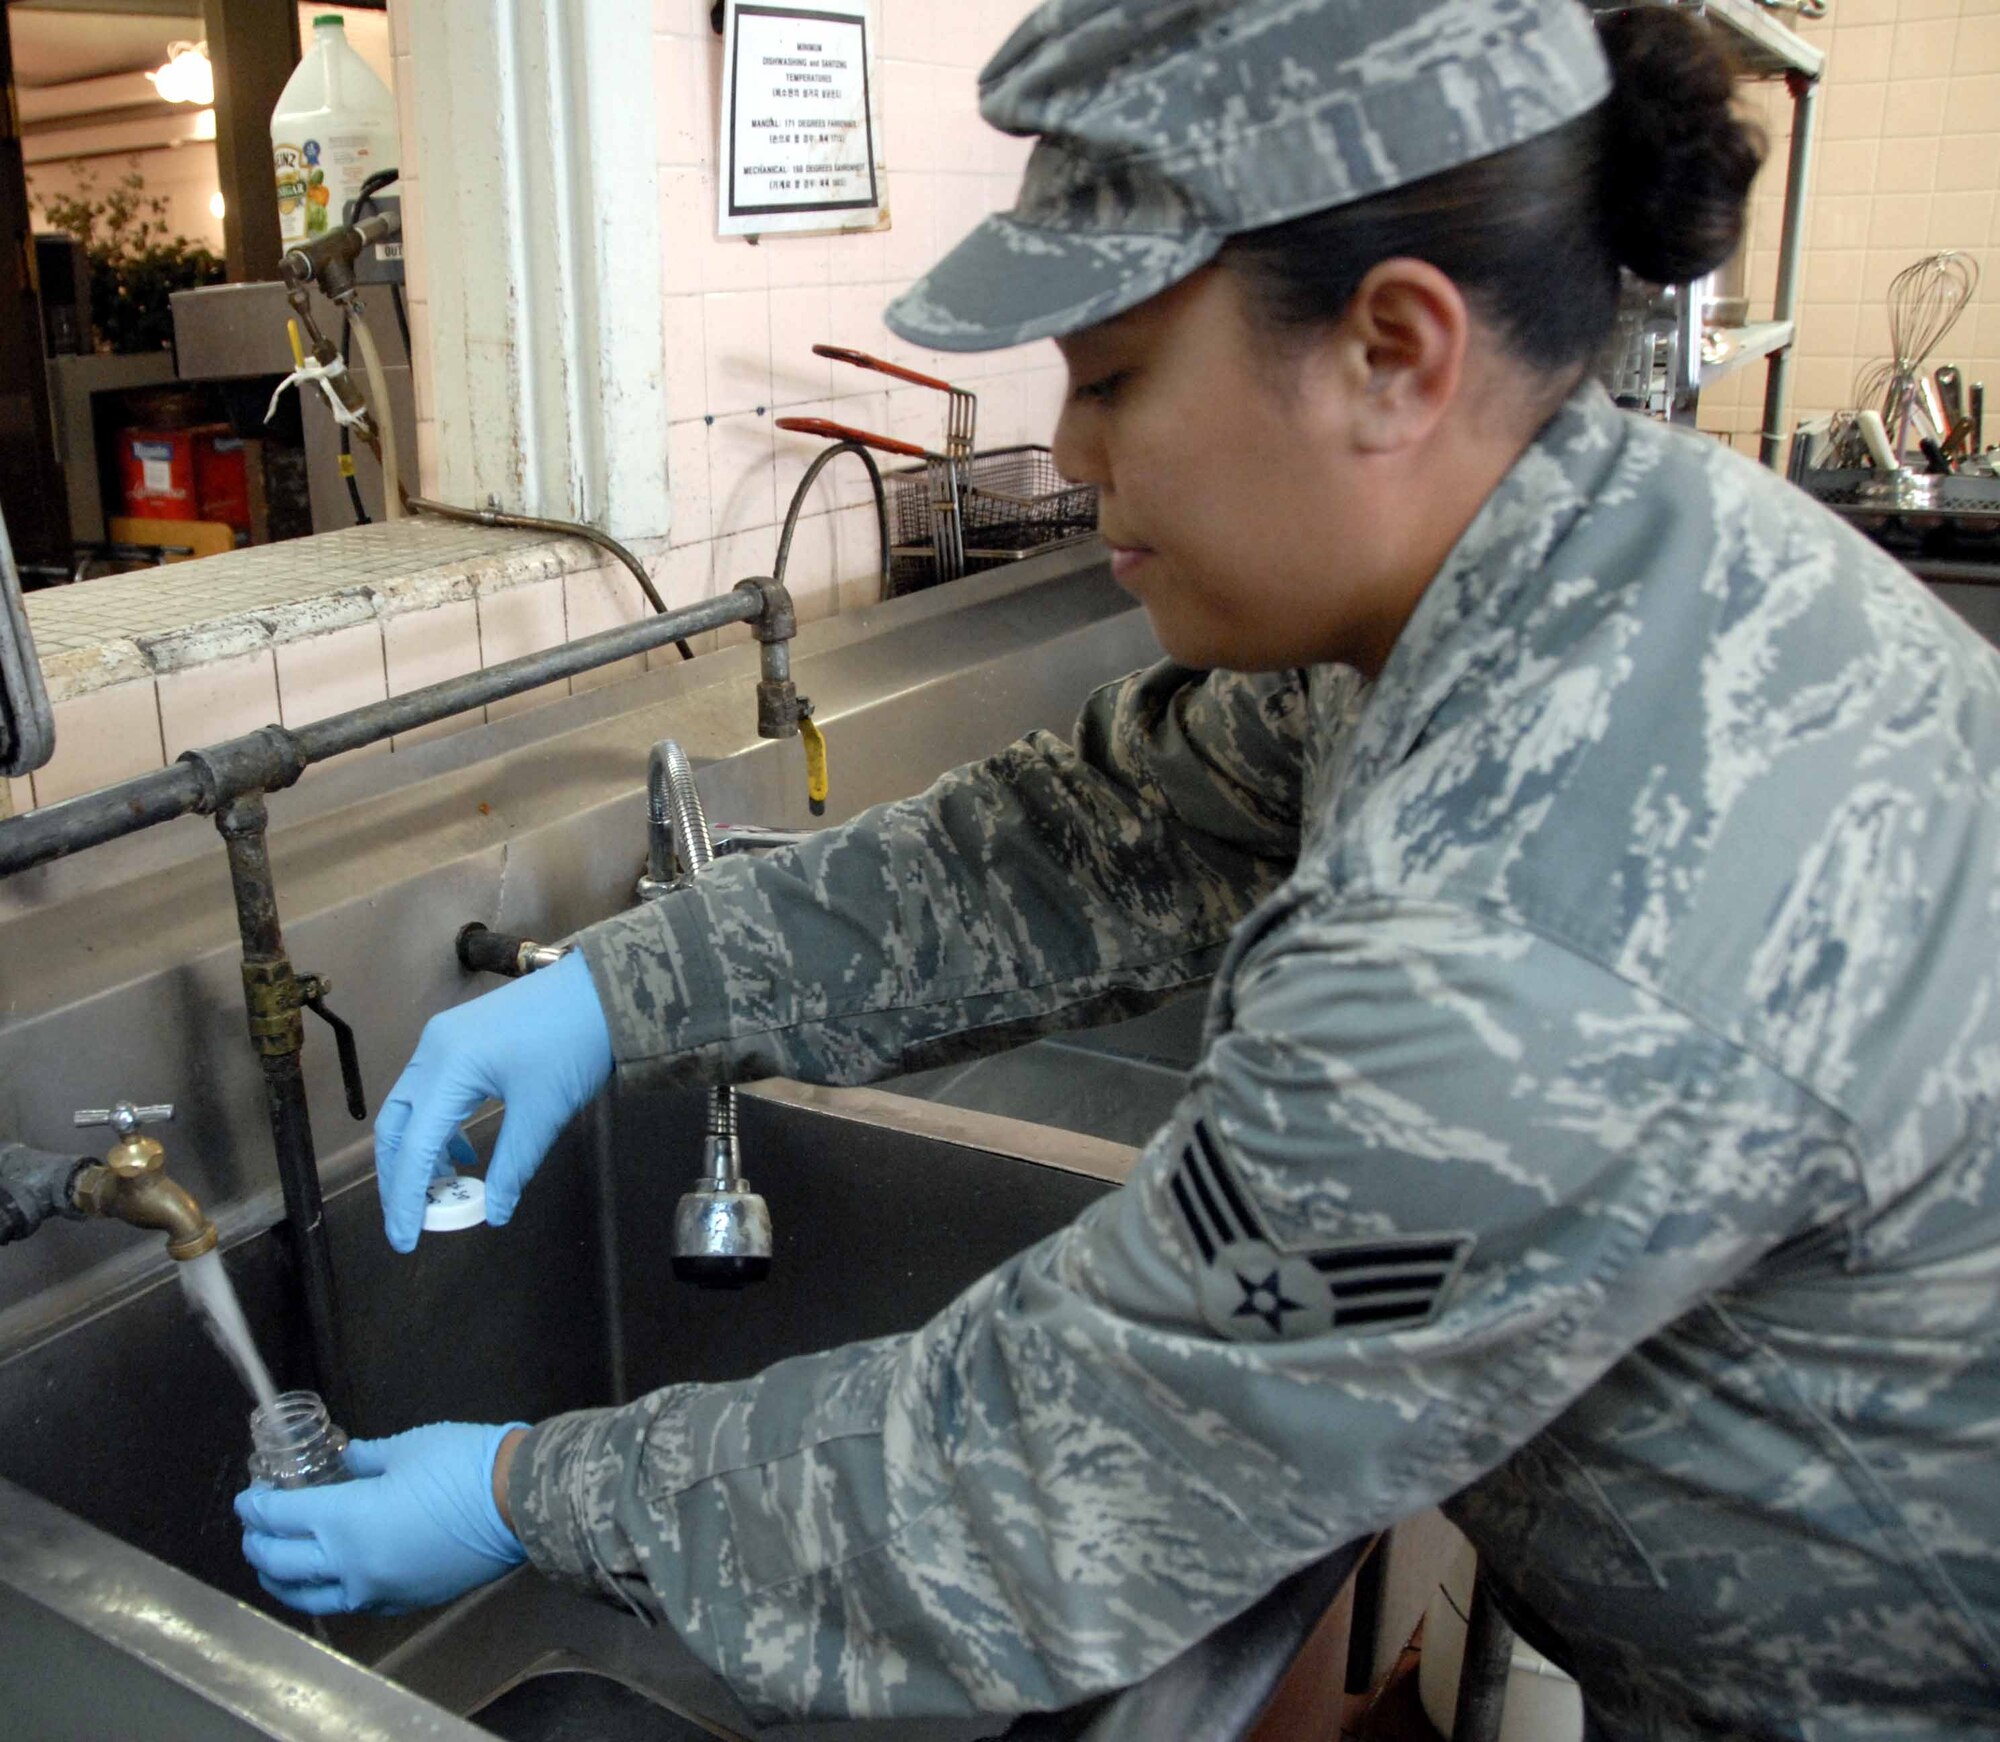 OSAN AIR BASE, Republic of Korea -- Senior Airman Verna Munoz, 51st Aerospace Medicine Squadron Bioenvironmental Engineering technician, gathers a sample of tap water during a routine health and safety check at the Challenger Club. The 51st AMDS’s Bioenvironmental Engineering Flight routinely tests Osan’s water supply to ensure water is safe to consume. (U.S. Air Force photo/Staff Sgt. Candy Knight)